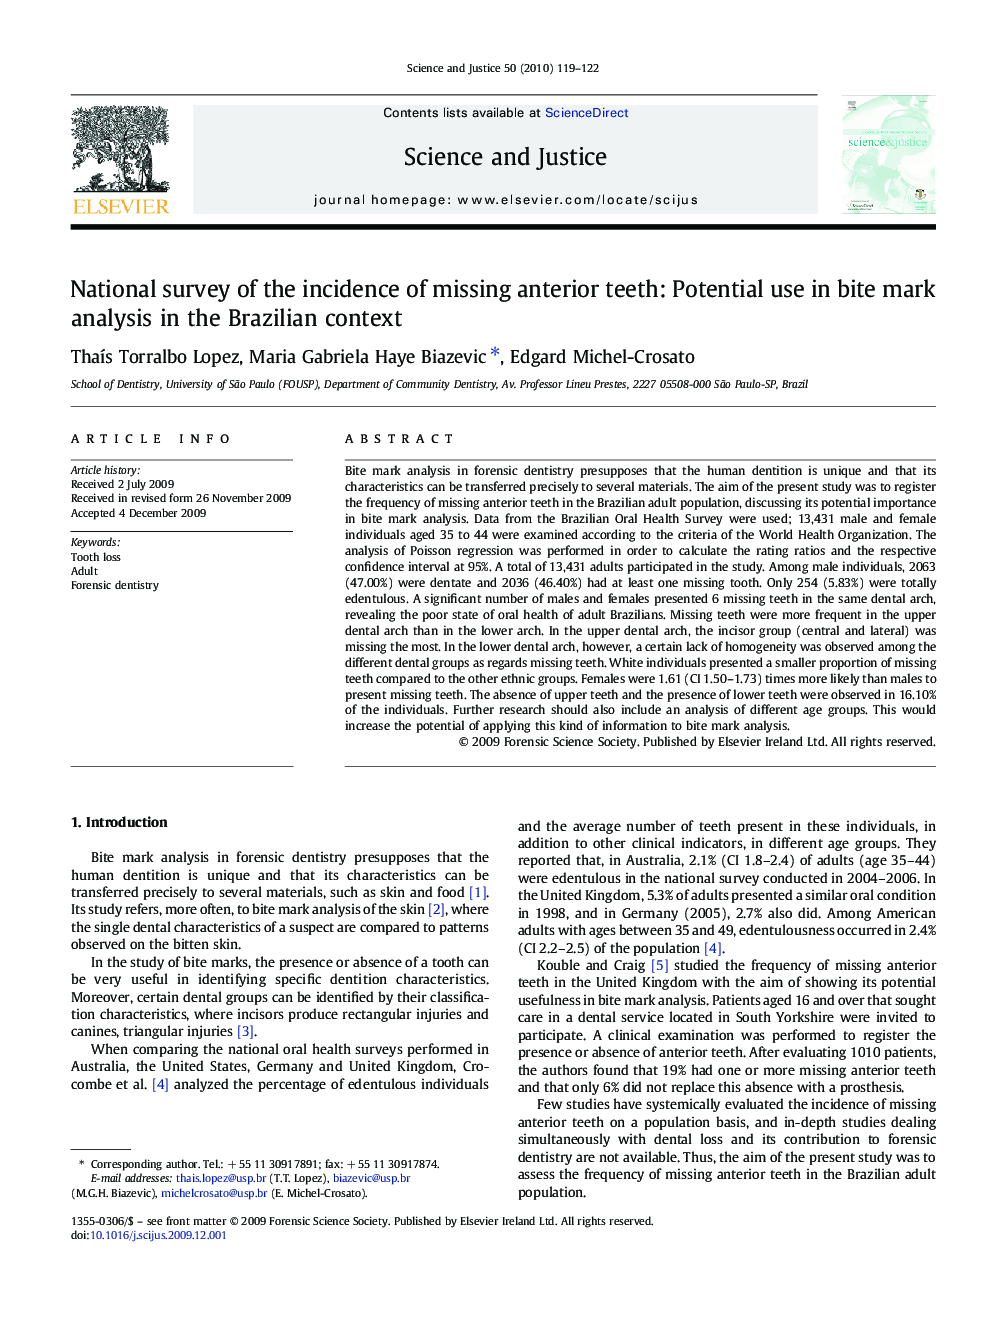 National survey of the incidence of missing anterior teeth: Potential use in bite mark analysis in the Brazilian context